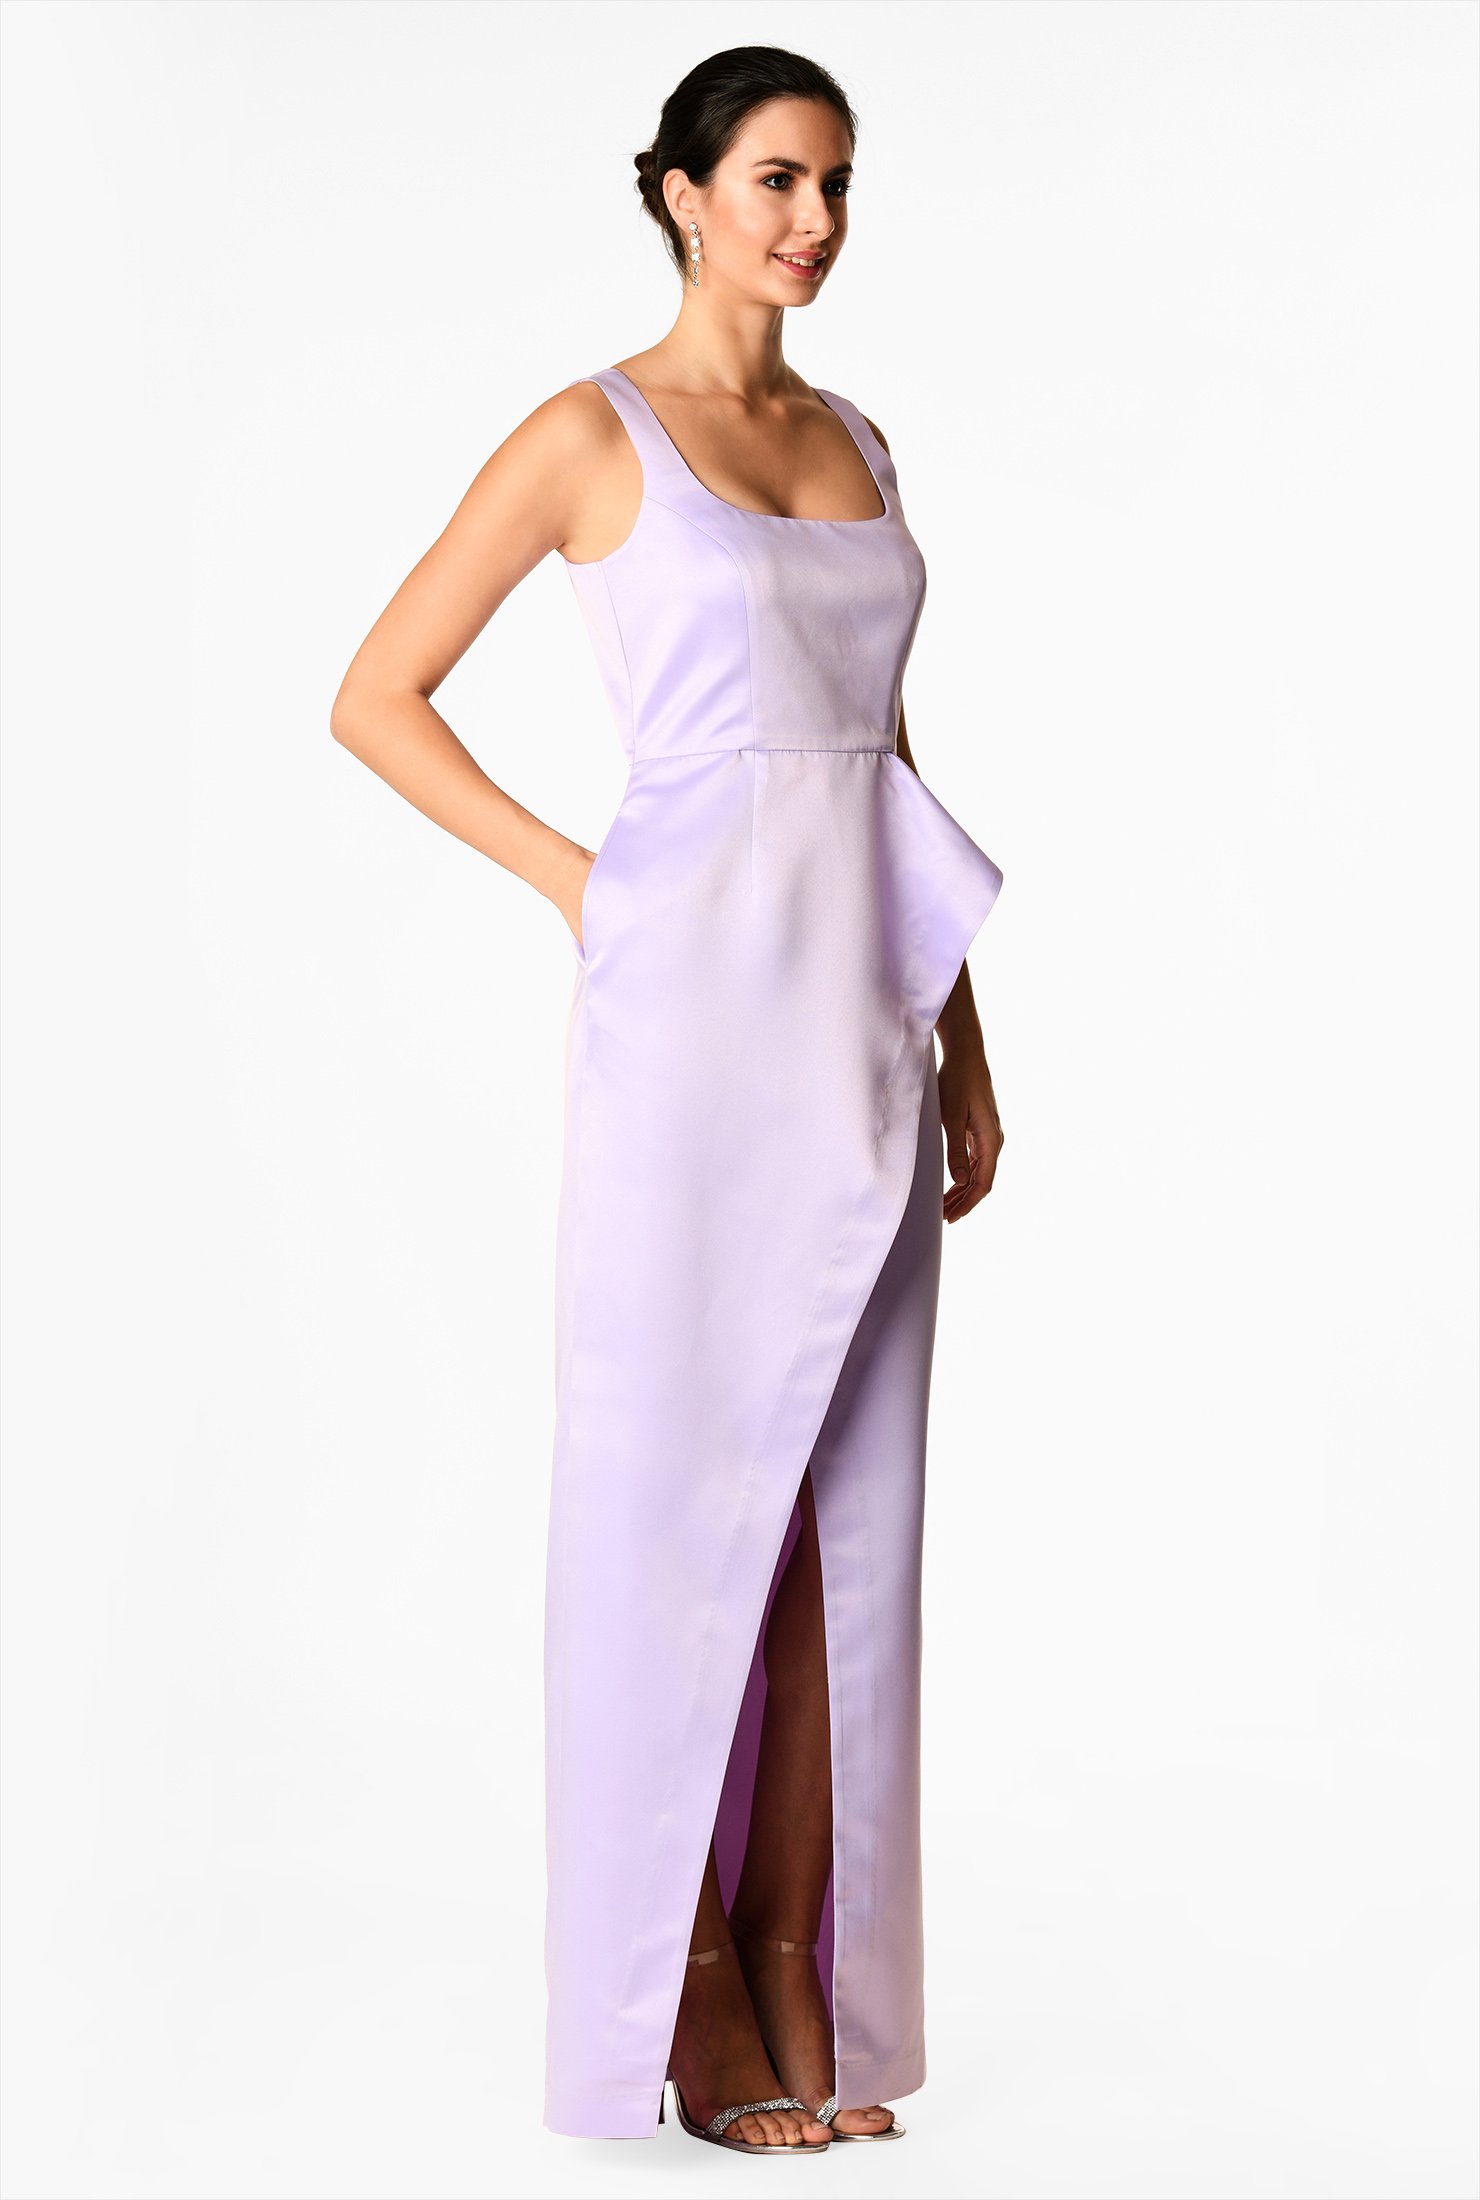 A-line styling sculpts flattering shape in our satin dress detailed with a square neck and a ruffle drape front which angles down the skirt for a flirty show of leg.